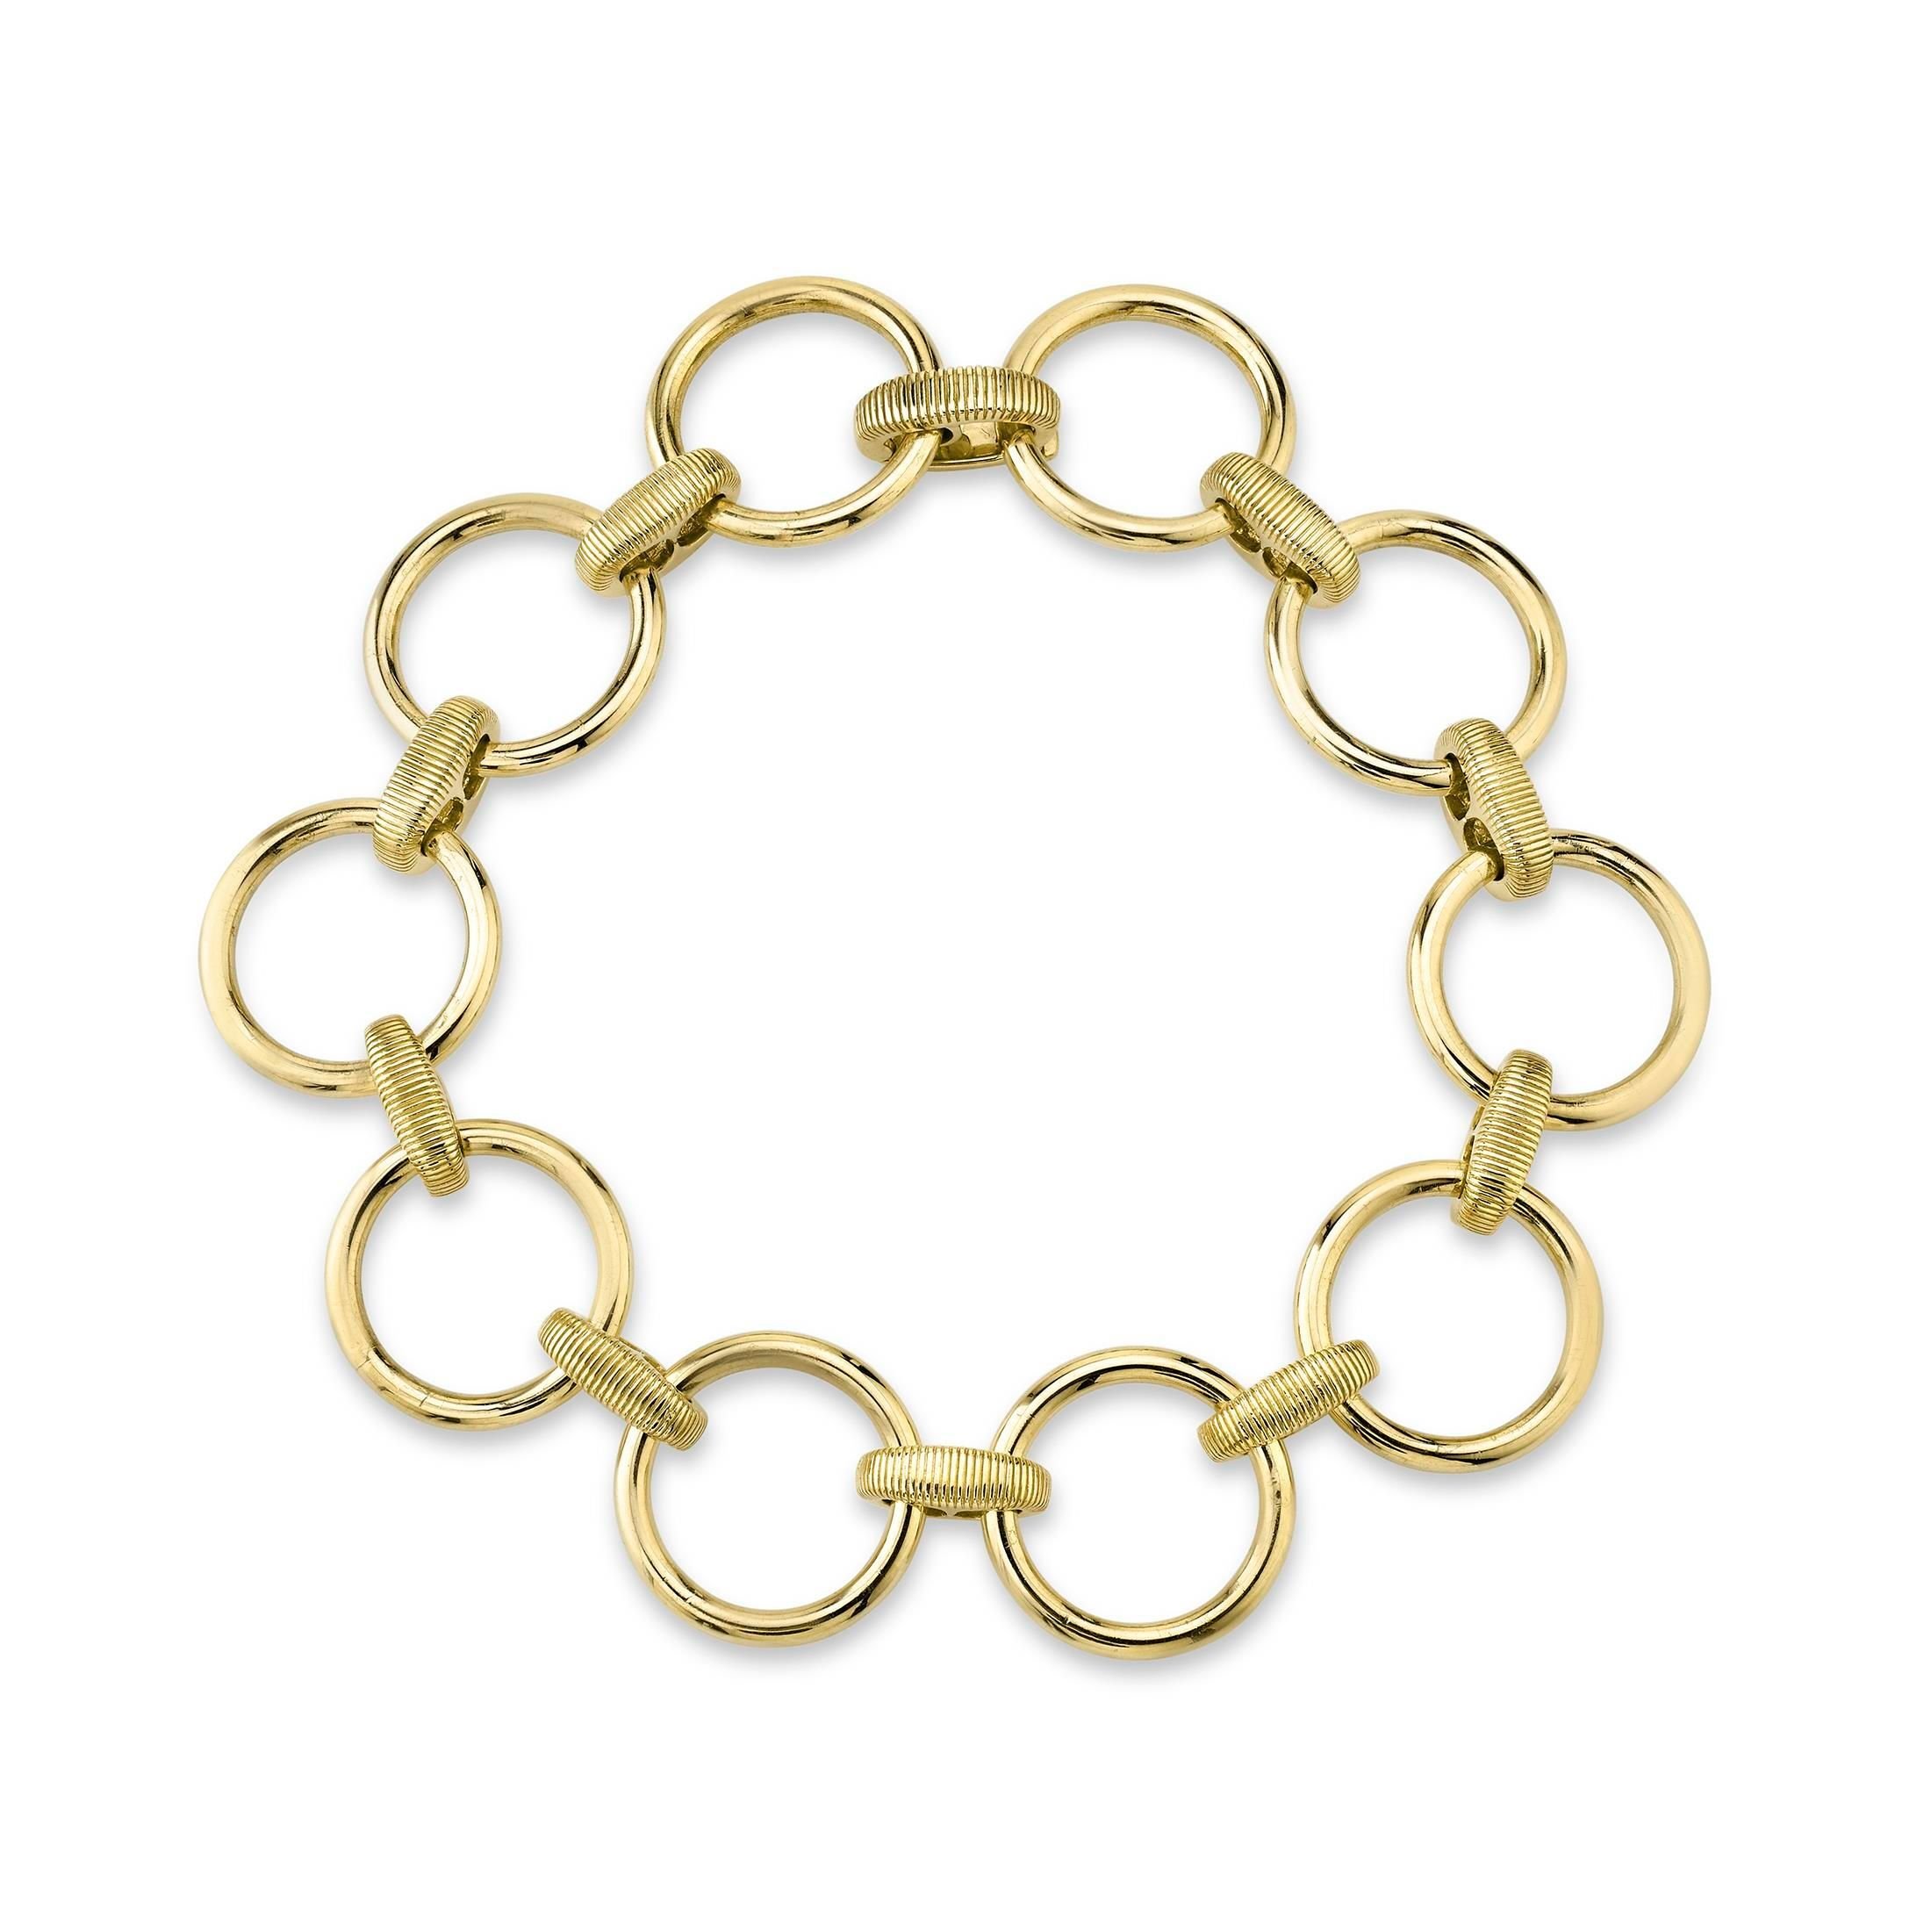 T ROUND LINK BRACELET WITH STRIE CONNECTORS